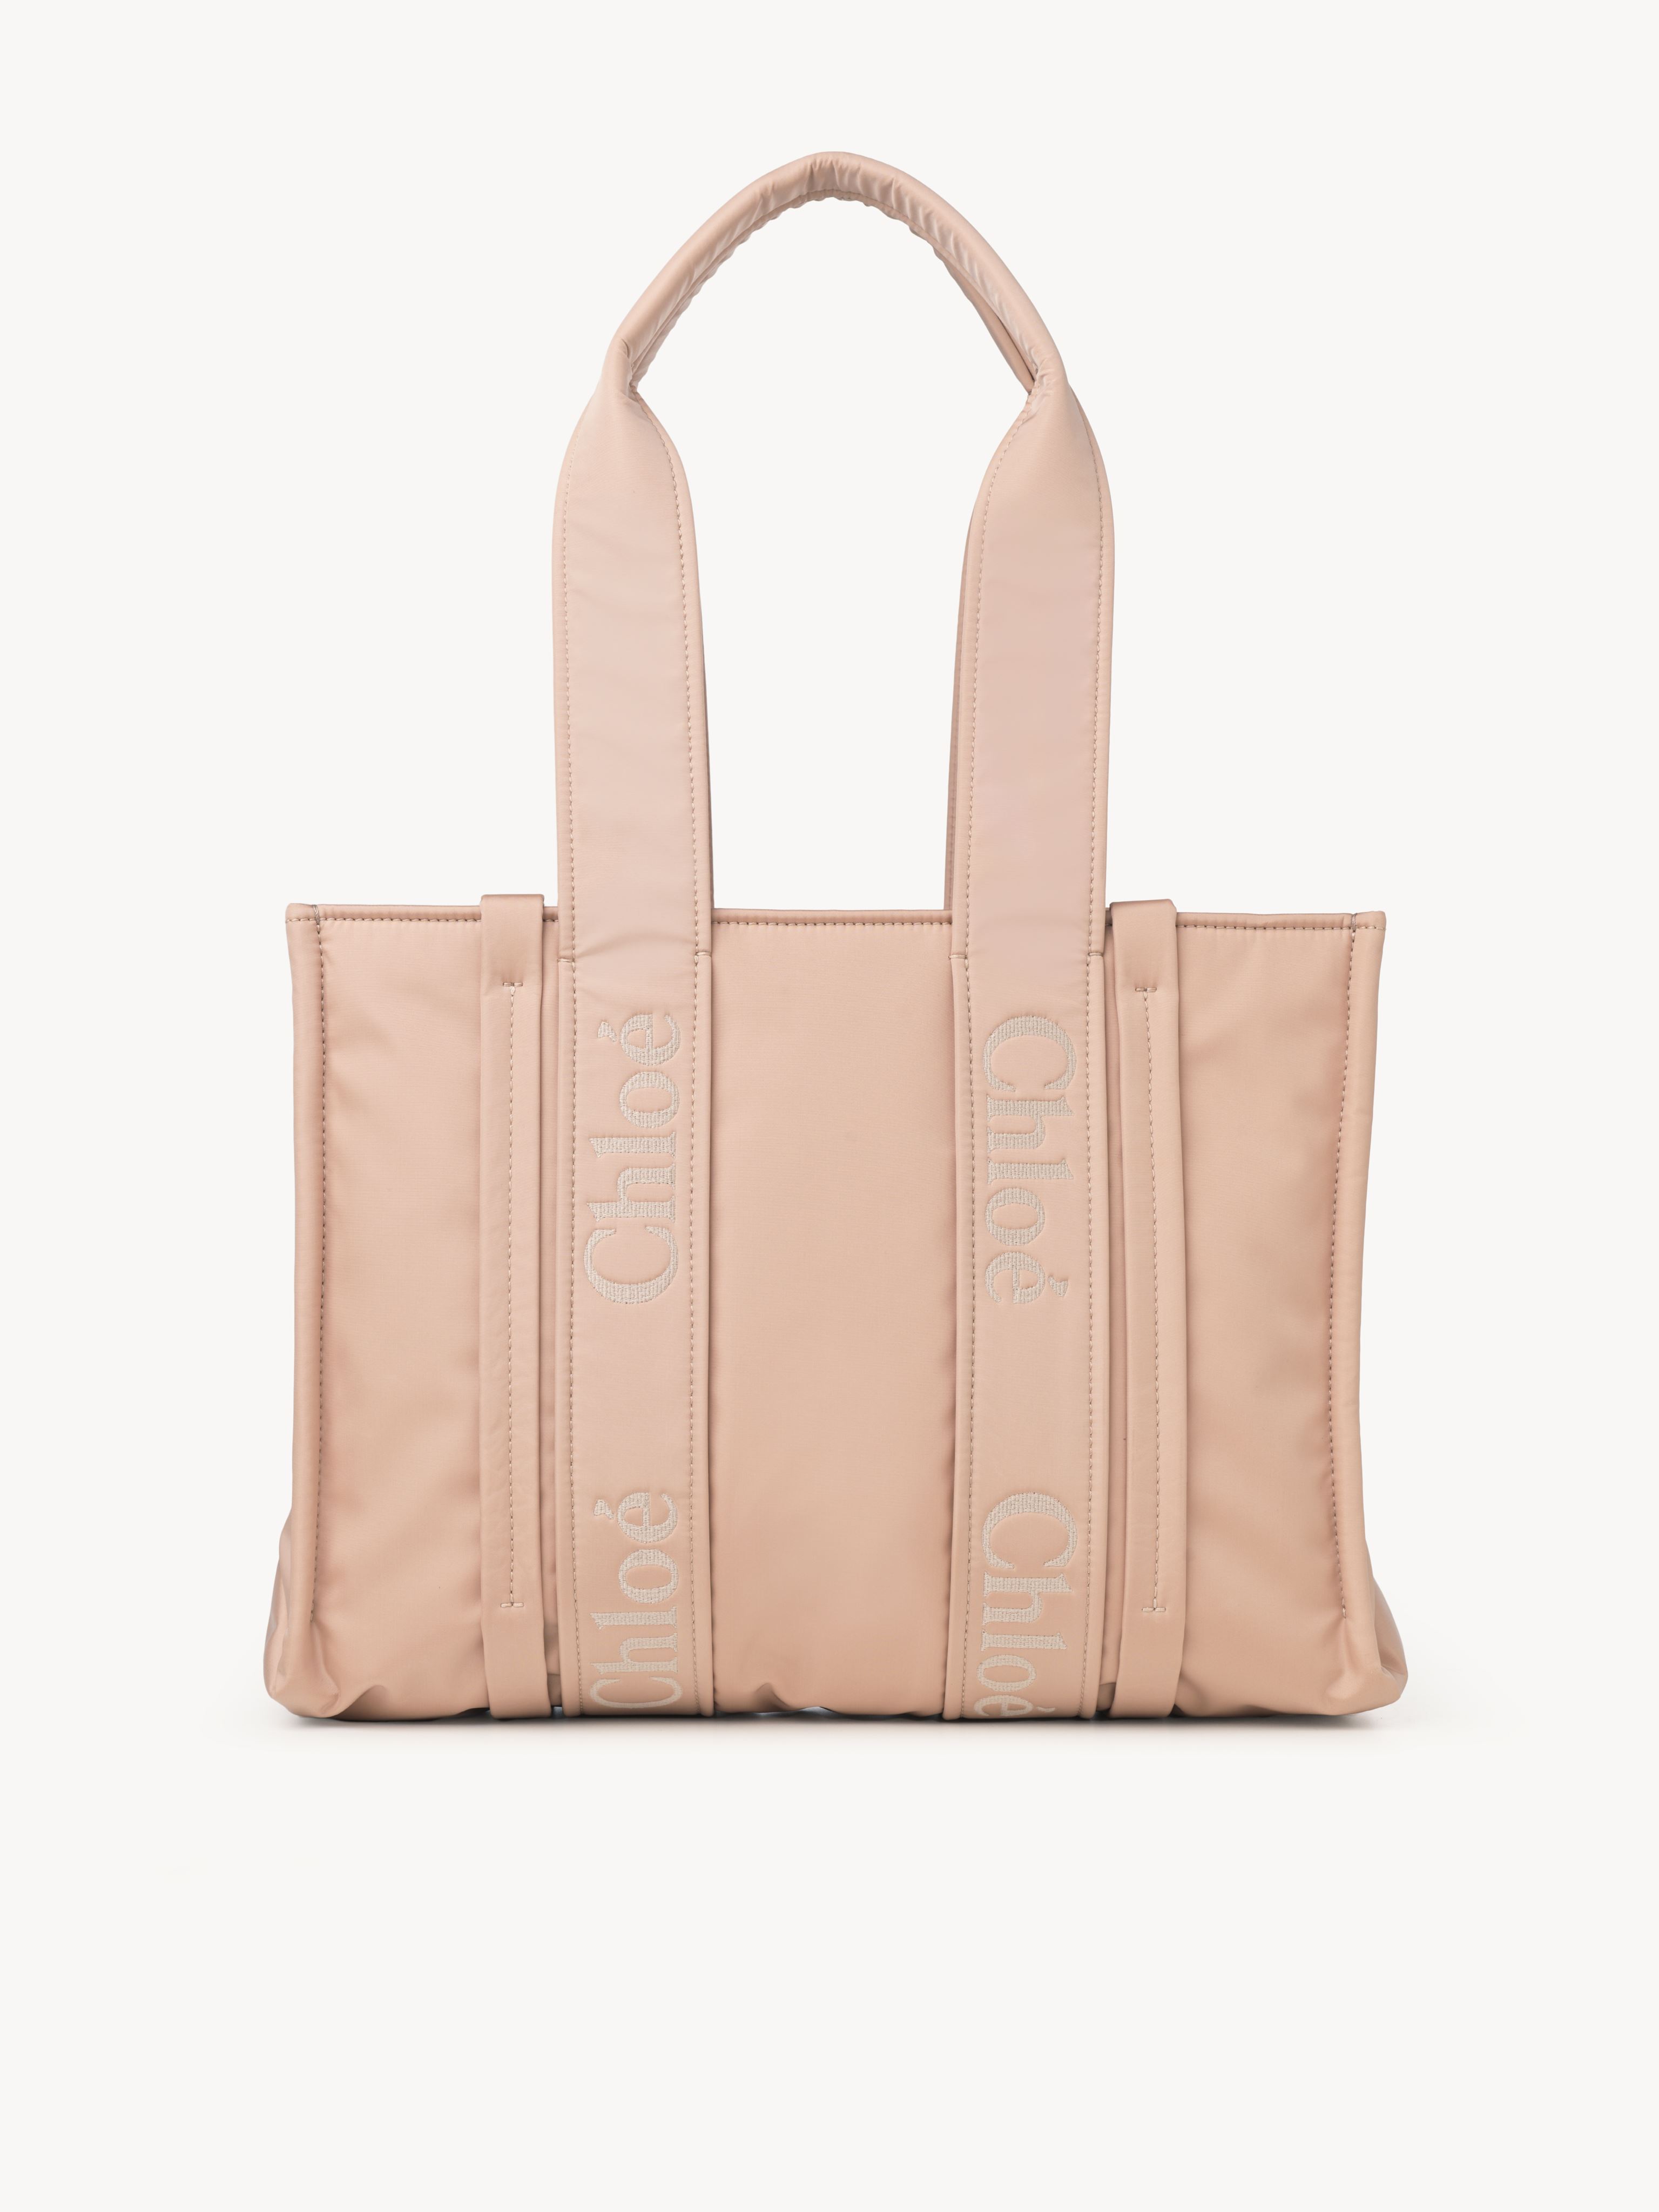 Chloé Sac Cabas Woody Femme Rose Taille Onesize 40% Polyuréthane, 30% Polyamide, 30% Polyester In Pink